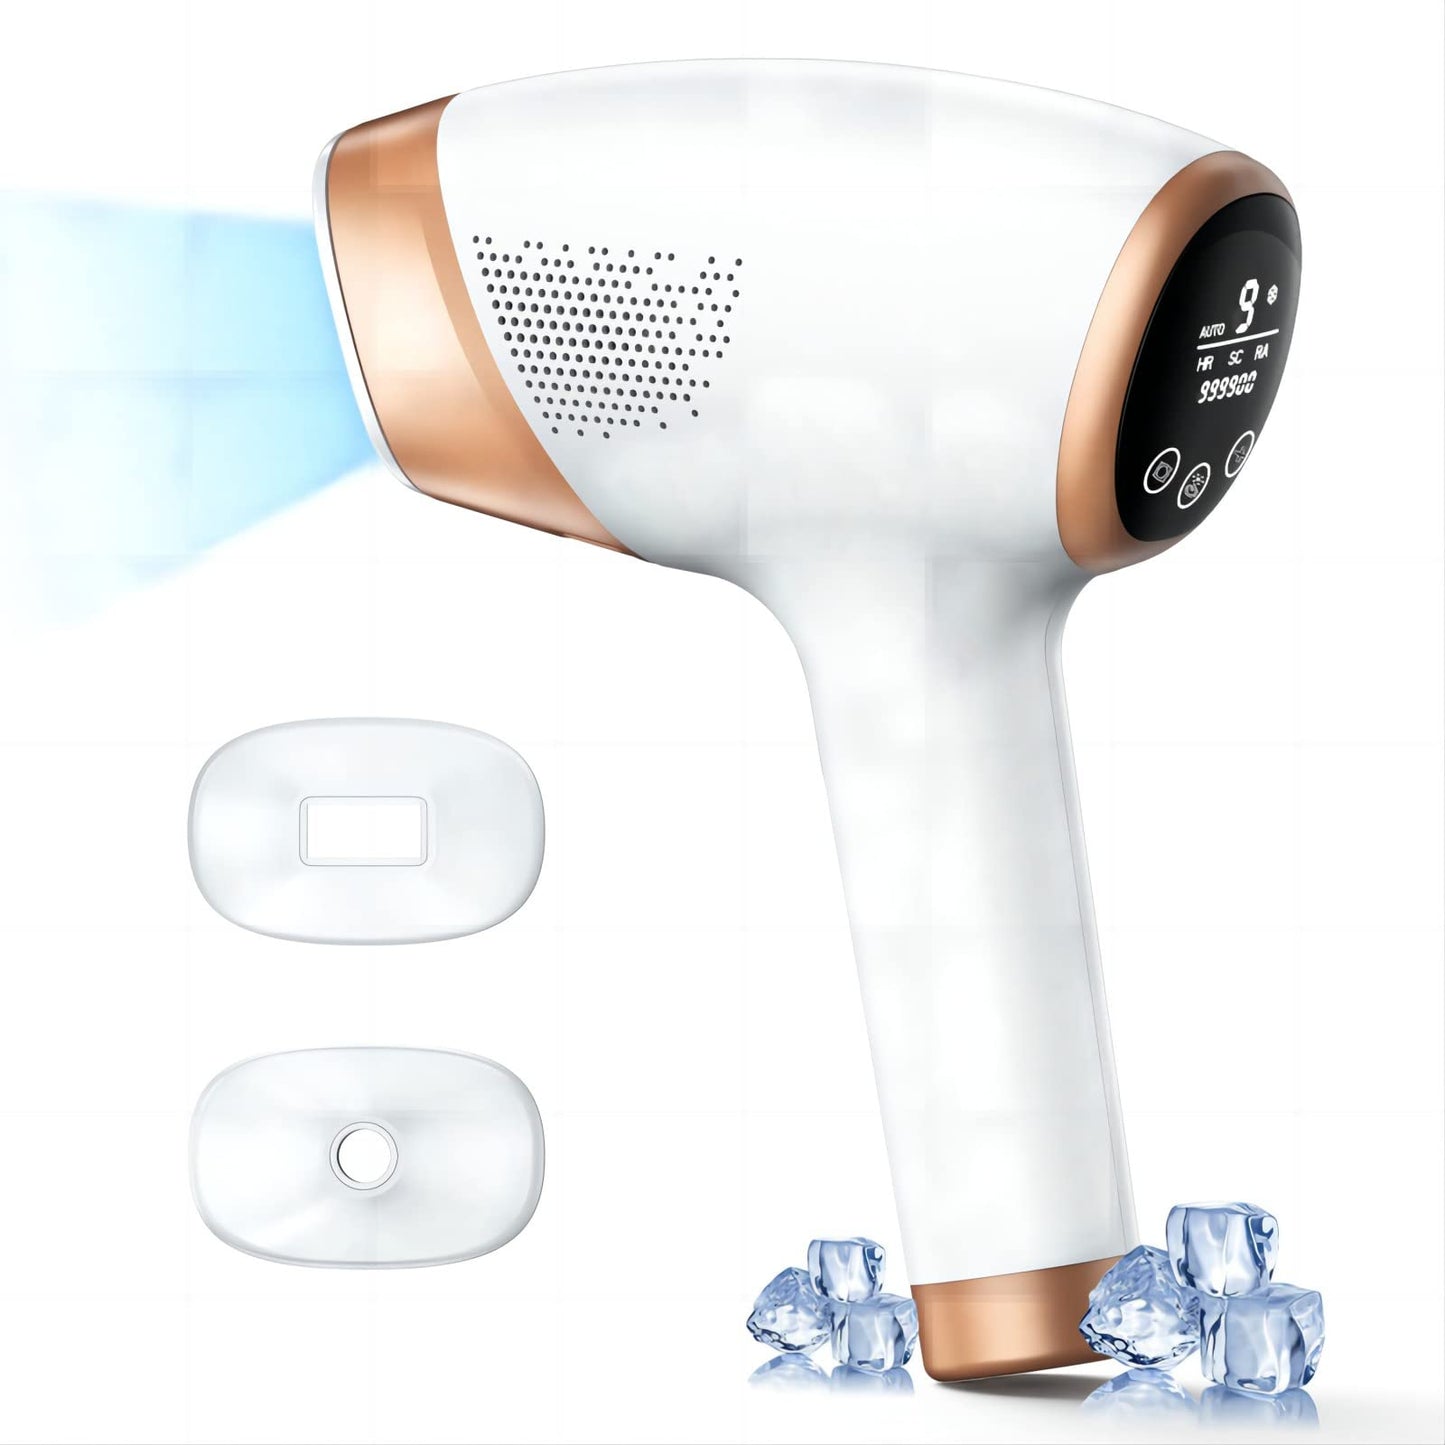 Laser Hair Removal for Women, Permanent At-Home IPL Hair Removal Device Painless with Ice Cooling Function Hair Remover Machine on Legs Armpits Back Arms Face Bikini Line